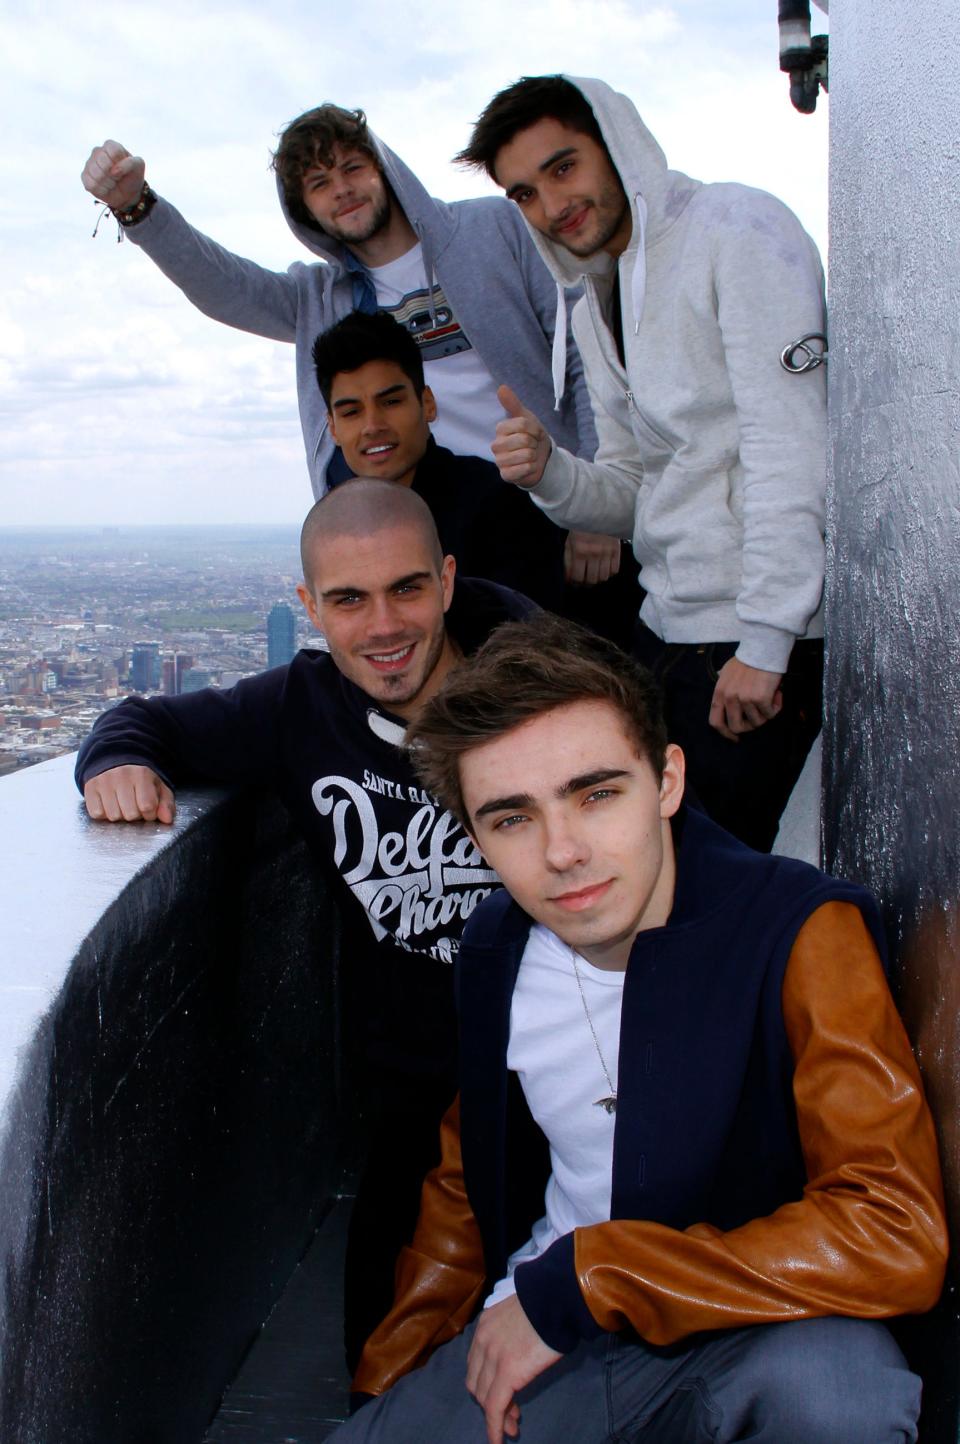 Looking back on the whole ordeal, the Wanted's Nathan Sykes said he felt like 